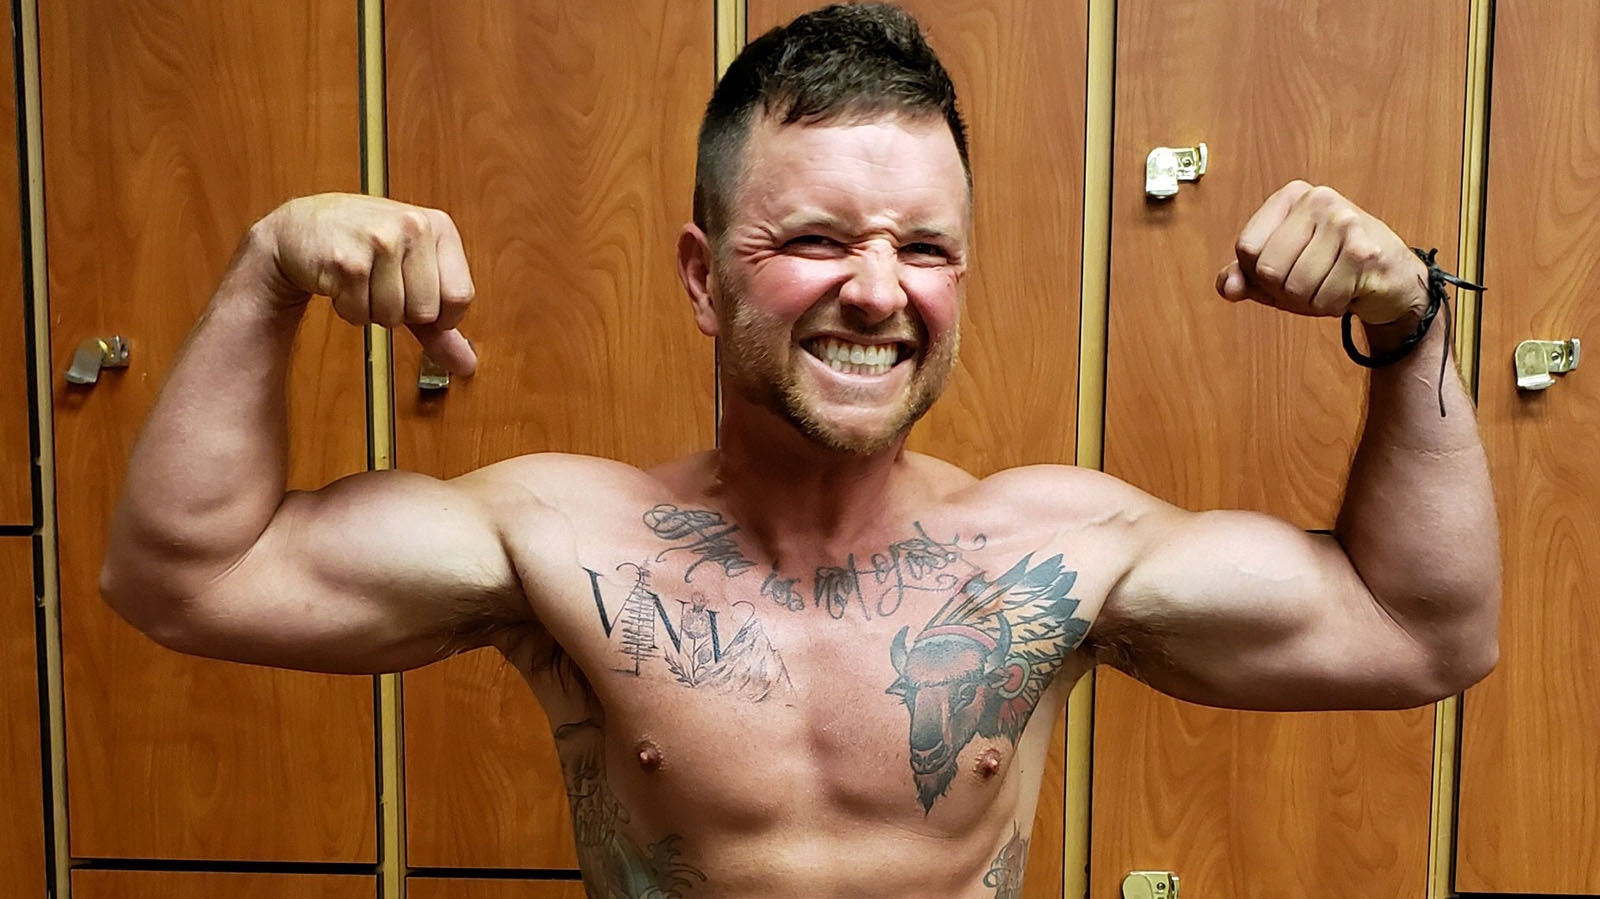 Taken a year after Nathan Kissack was put on maintenance chemo. Kissack told Cowboy State Daily he just made up a competition for himself, to see what kind of dramatic physical change he could make happen with his body after being told by doctors not to work out.